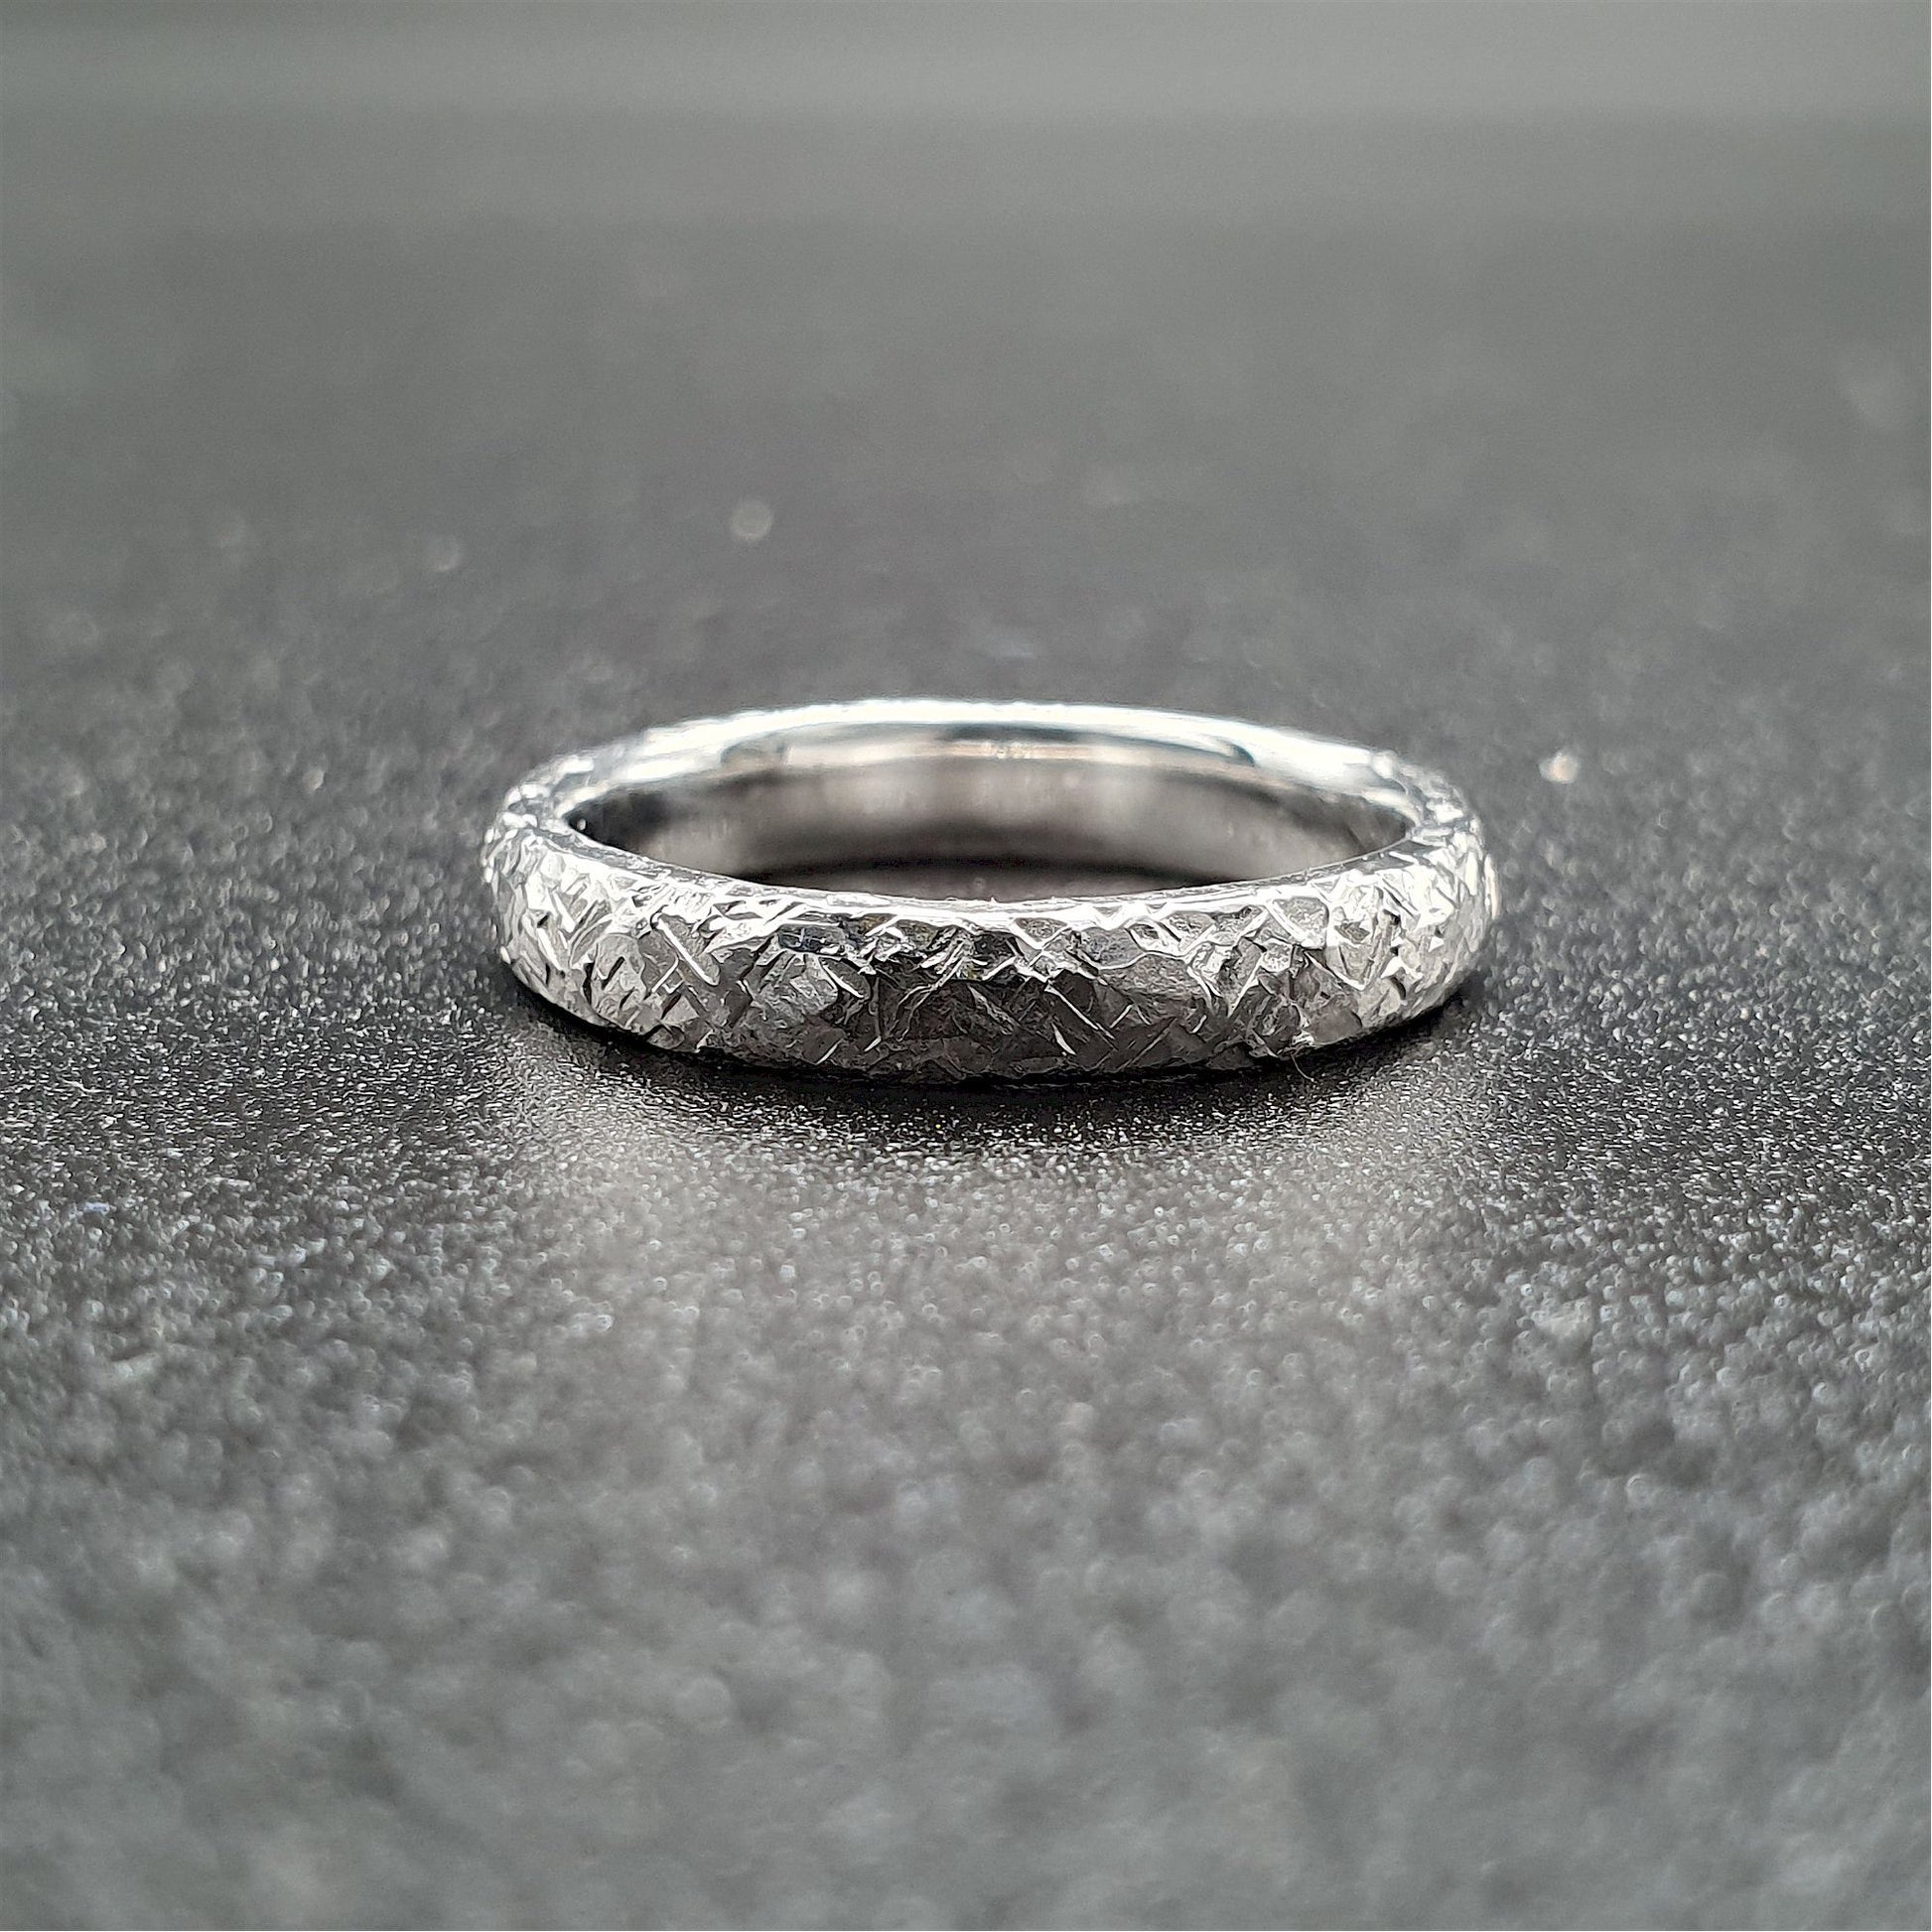 Wedding ring, thin white gold Fire hammered design Designer Wedding Rings Wedding Ring 